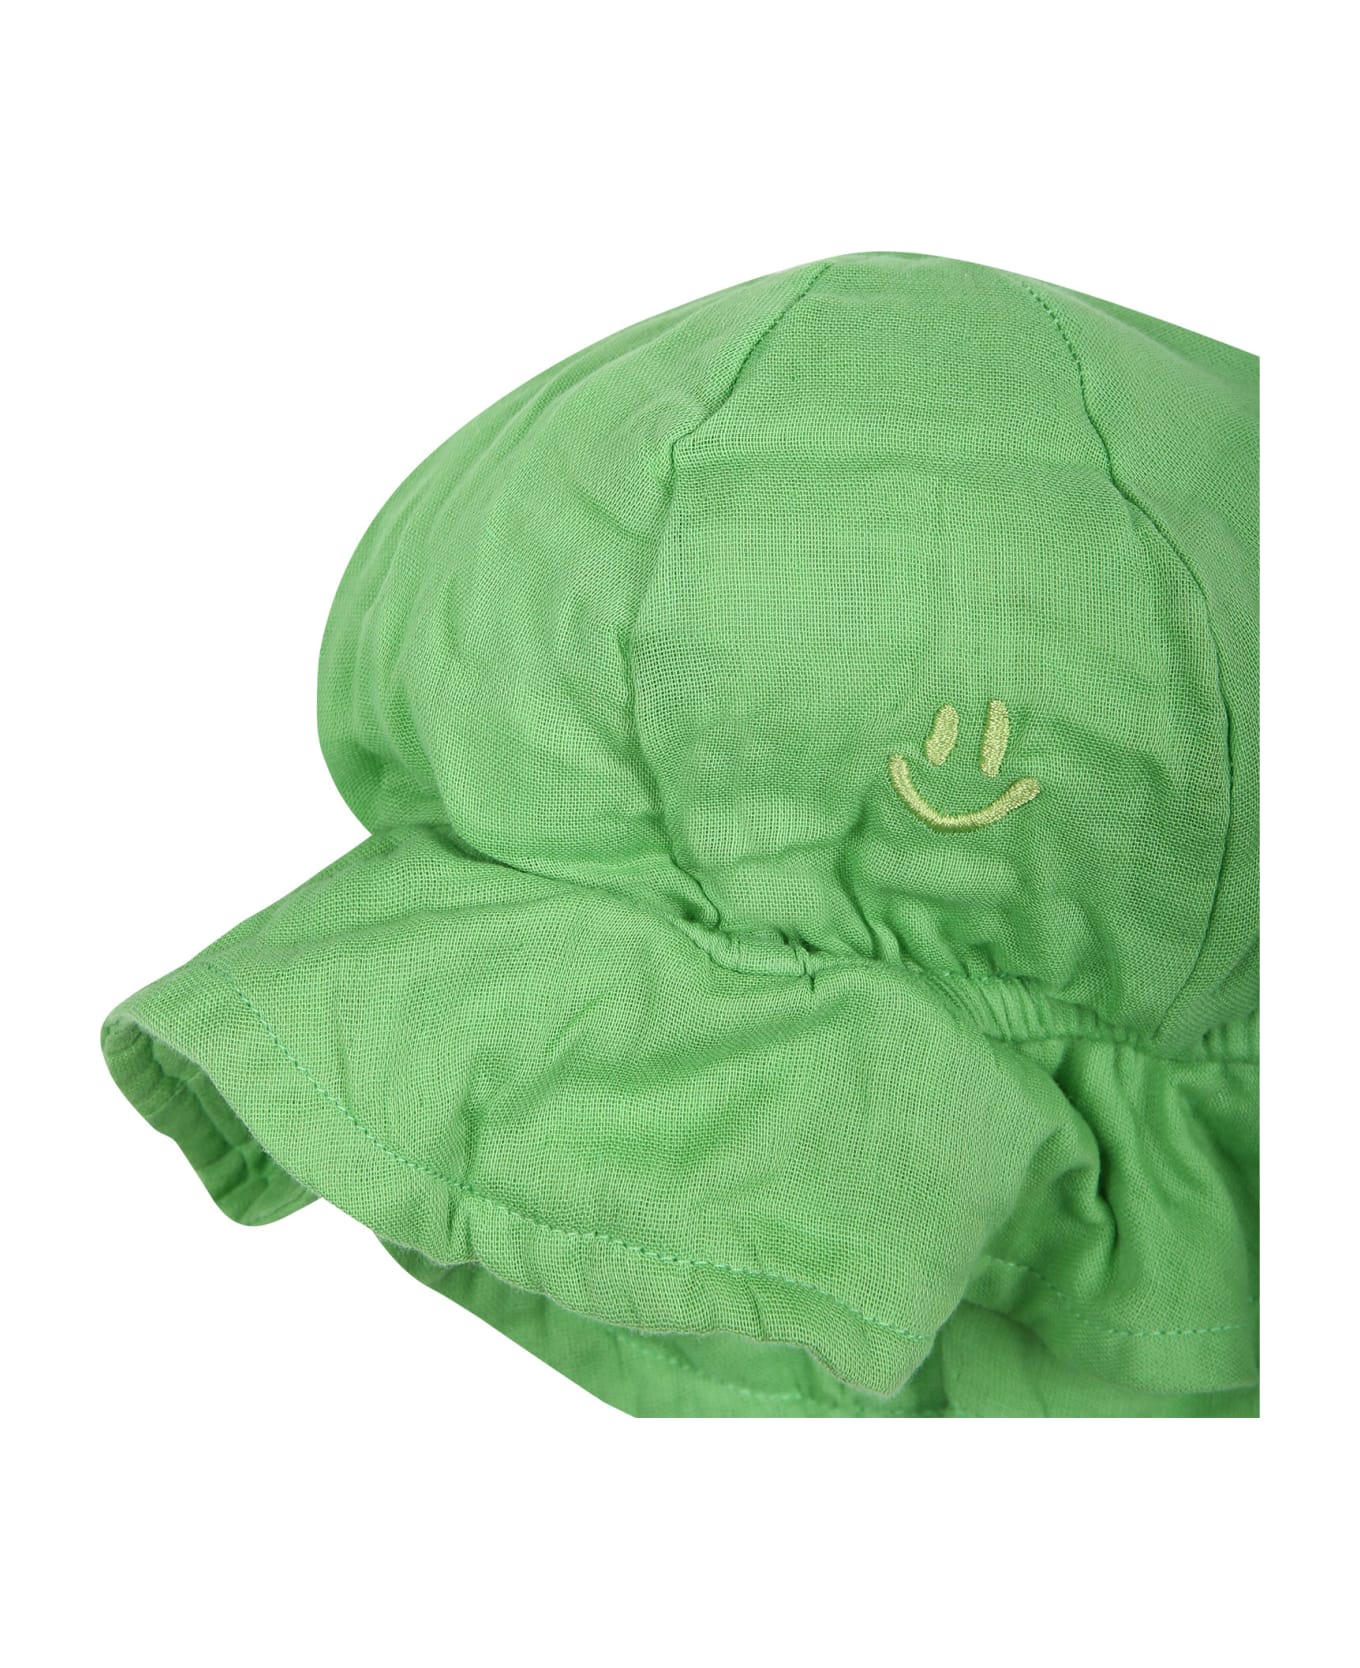 Molo Green Cloche For Bébé Kids With Smile - Green